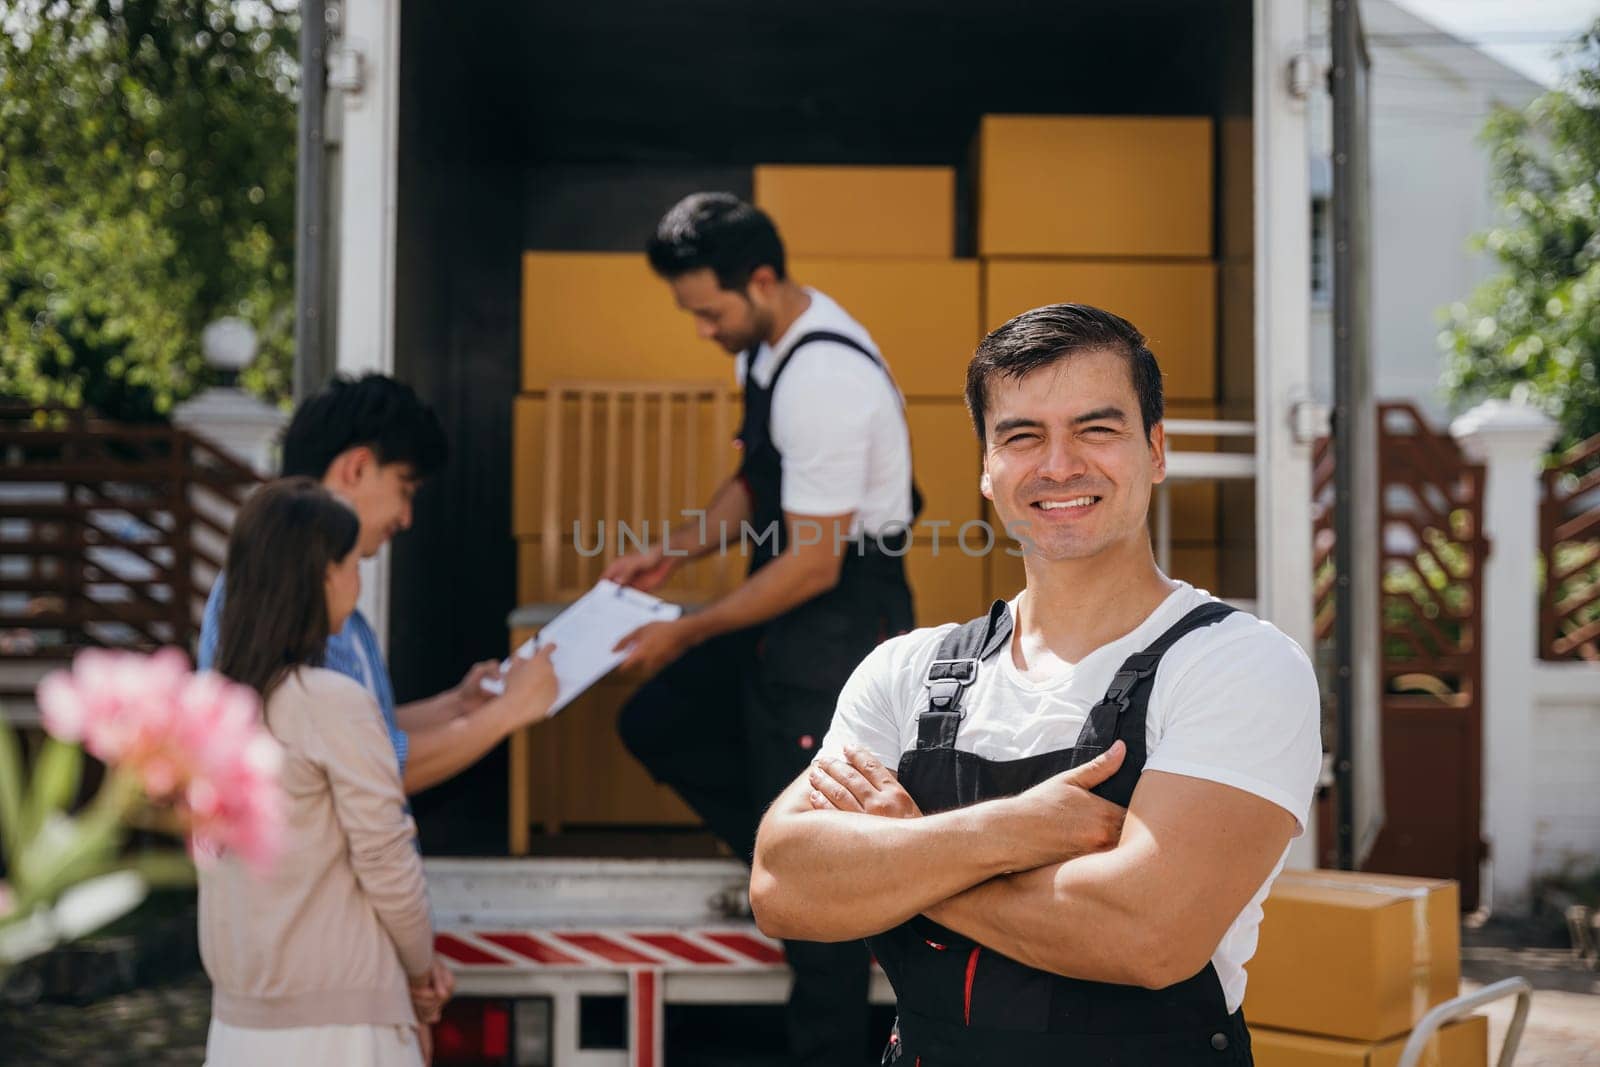 In a portrait a happy mover unloads boxes from a truck into a new home. These workers show teamwork ensuring a smooth relocation and happiness. Moving day concept